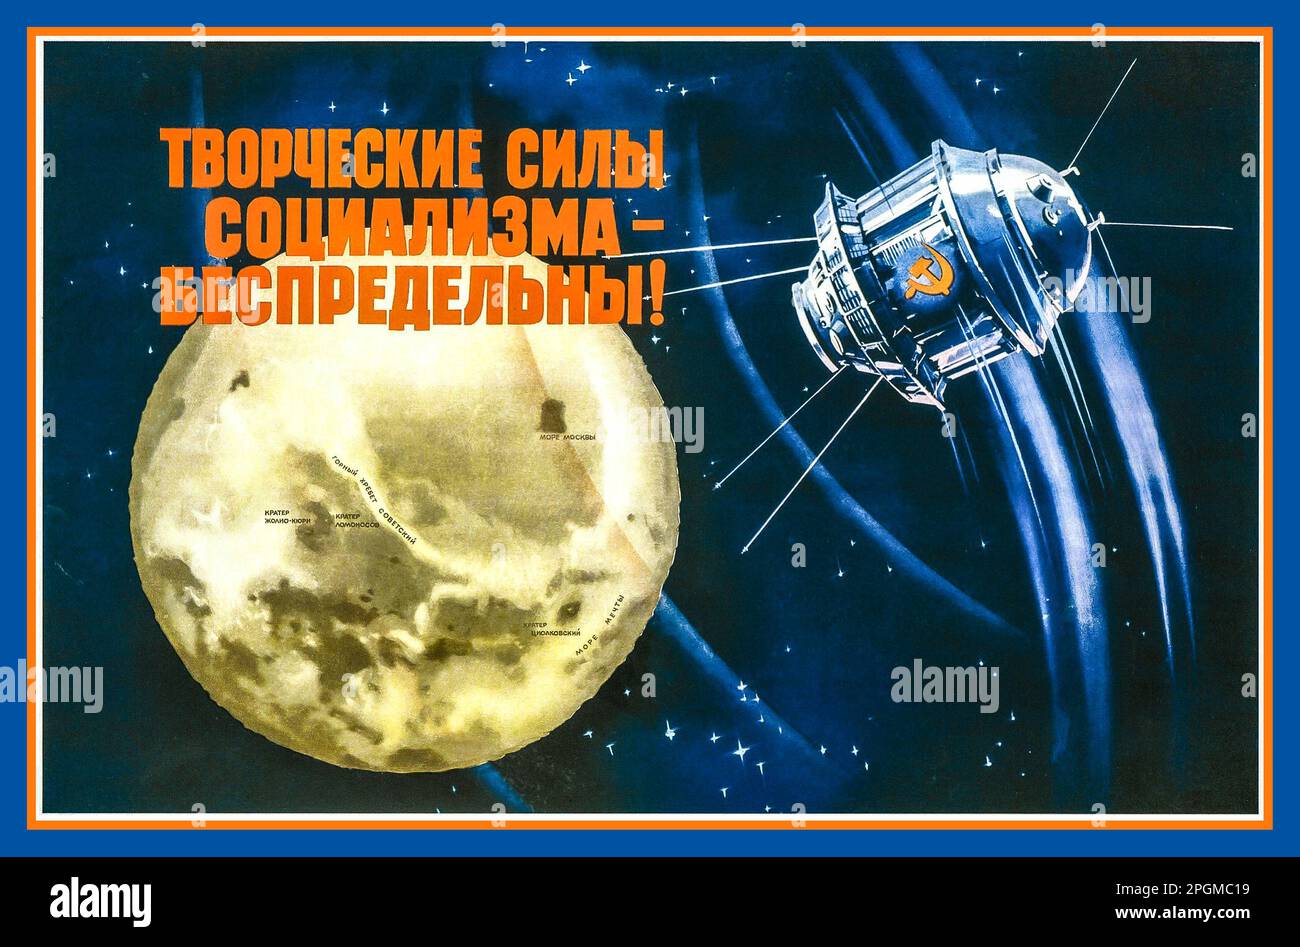 Soviet Russian 1950s USSR Space Propaganda poster illustrating space race technology with a Sputnik Satellite in space with the moon close by, as part of the Soviet Space Program. Poster captioned 'THE CREATIVE FORCES OF SOCIALISM ARE LIMITLESS !' Stock Photo